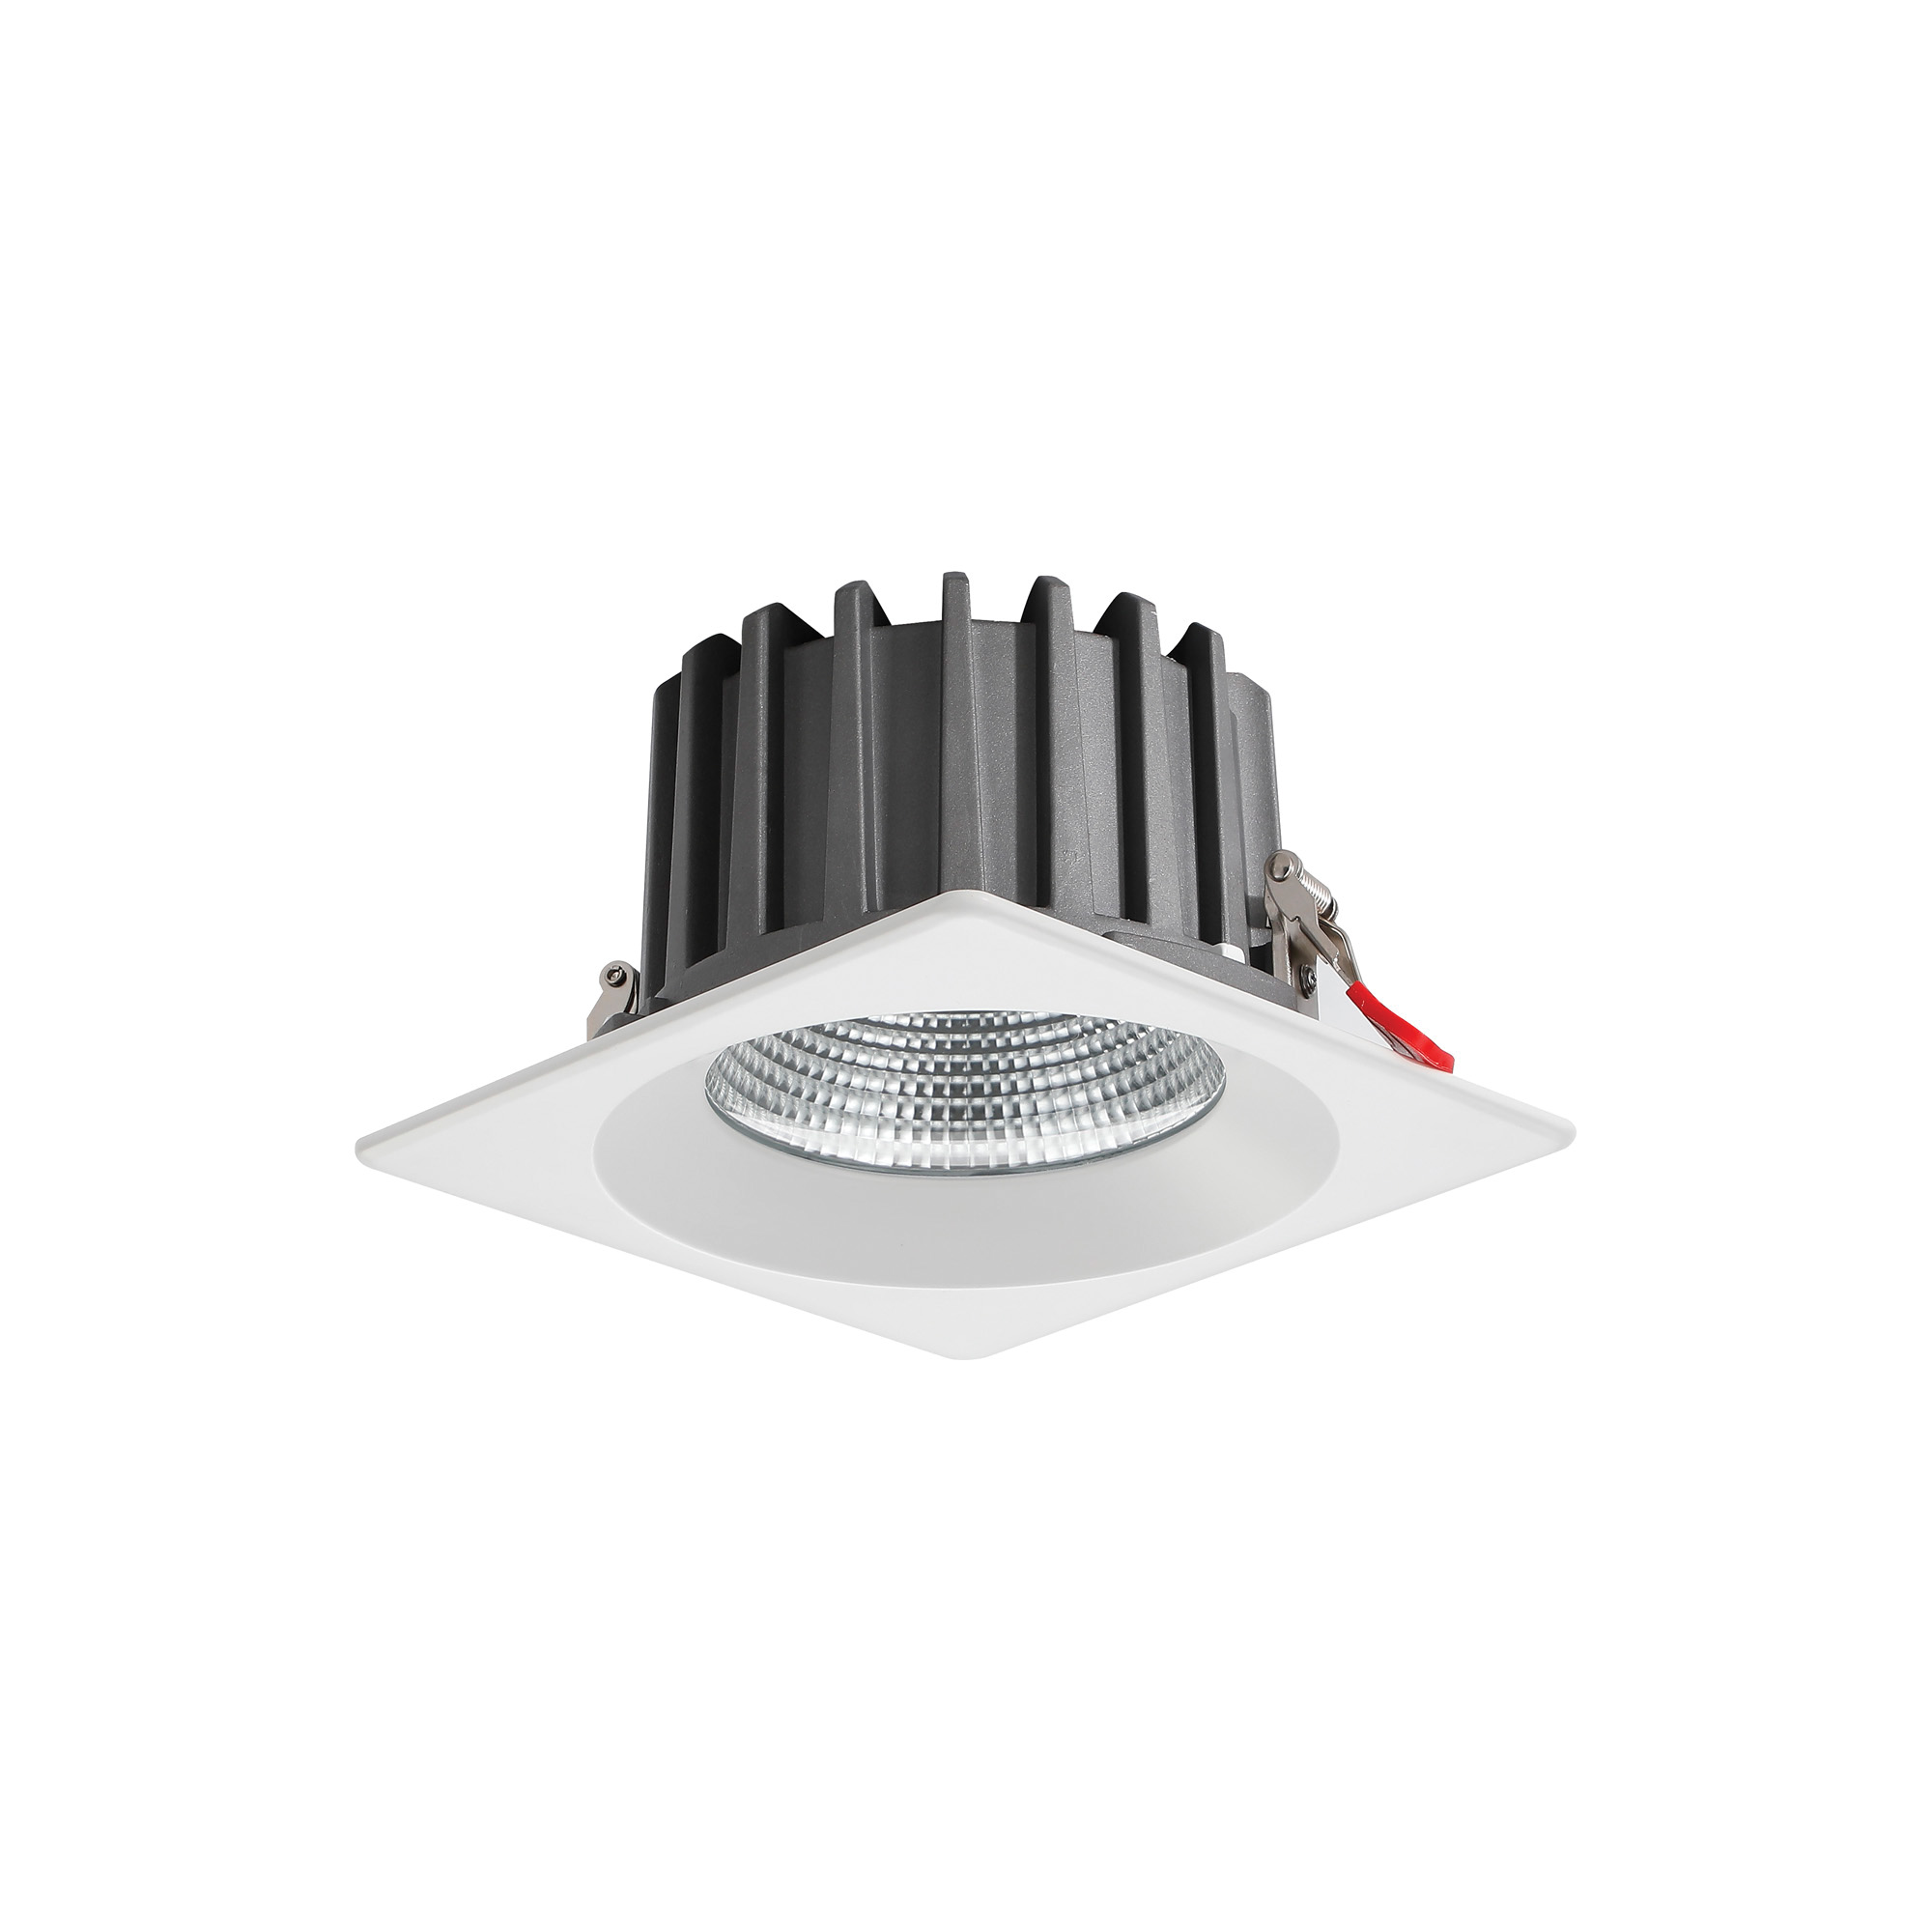 DL200075  Bionic 24; 24W; 700mA; White Deep Square Recessed Downlight; 2040lm ;Cut Out 155mm; 42° ; 5000K; IP44; DRIVER INC.; 5yrs Warranty.